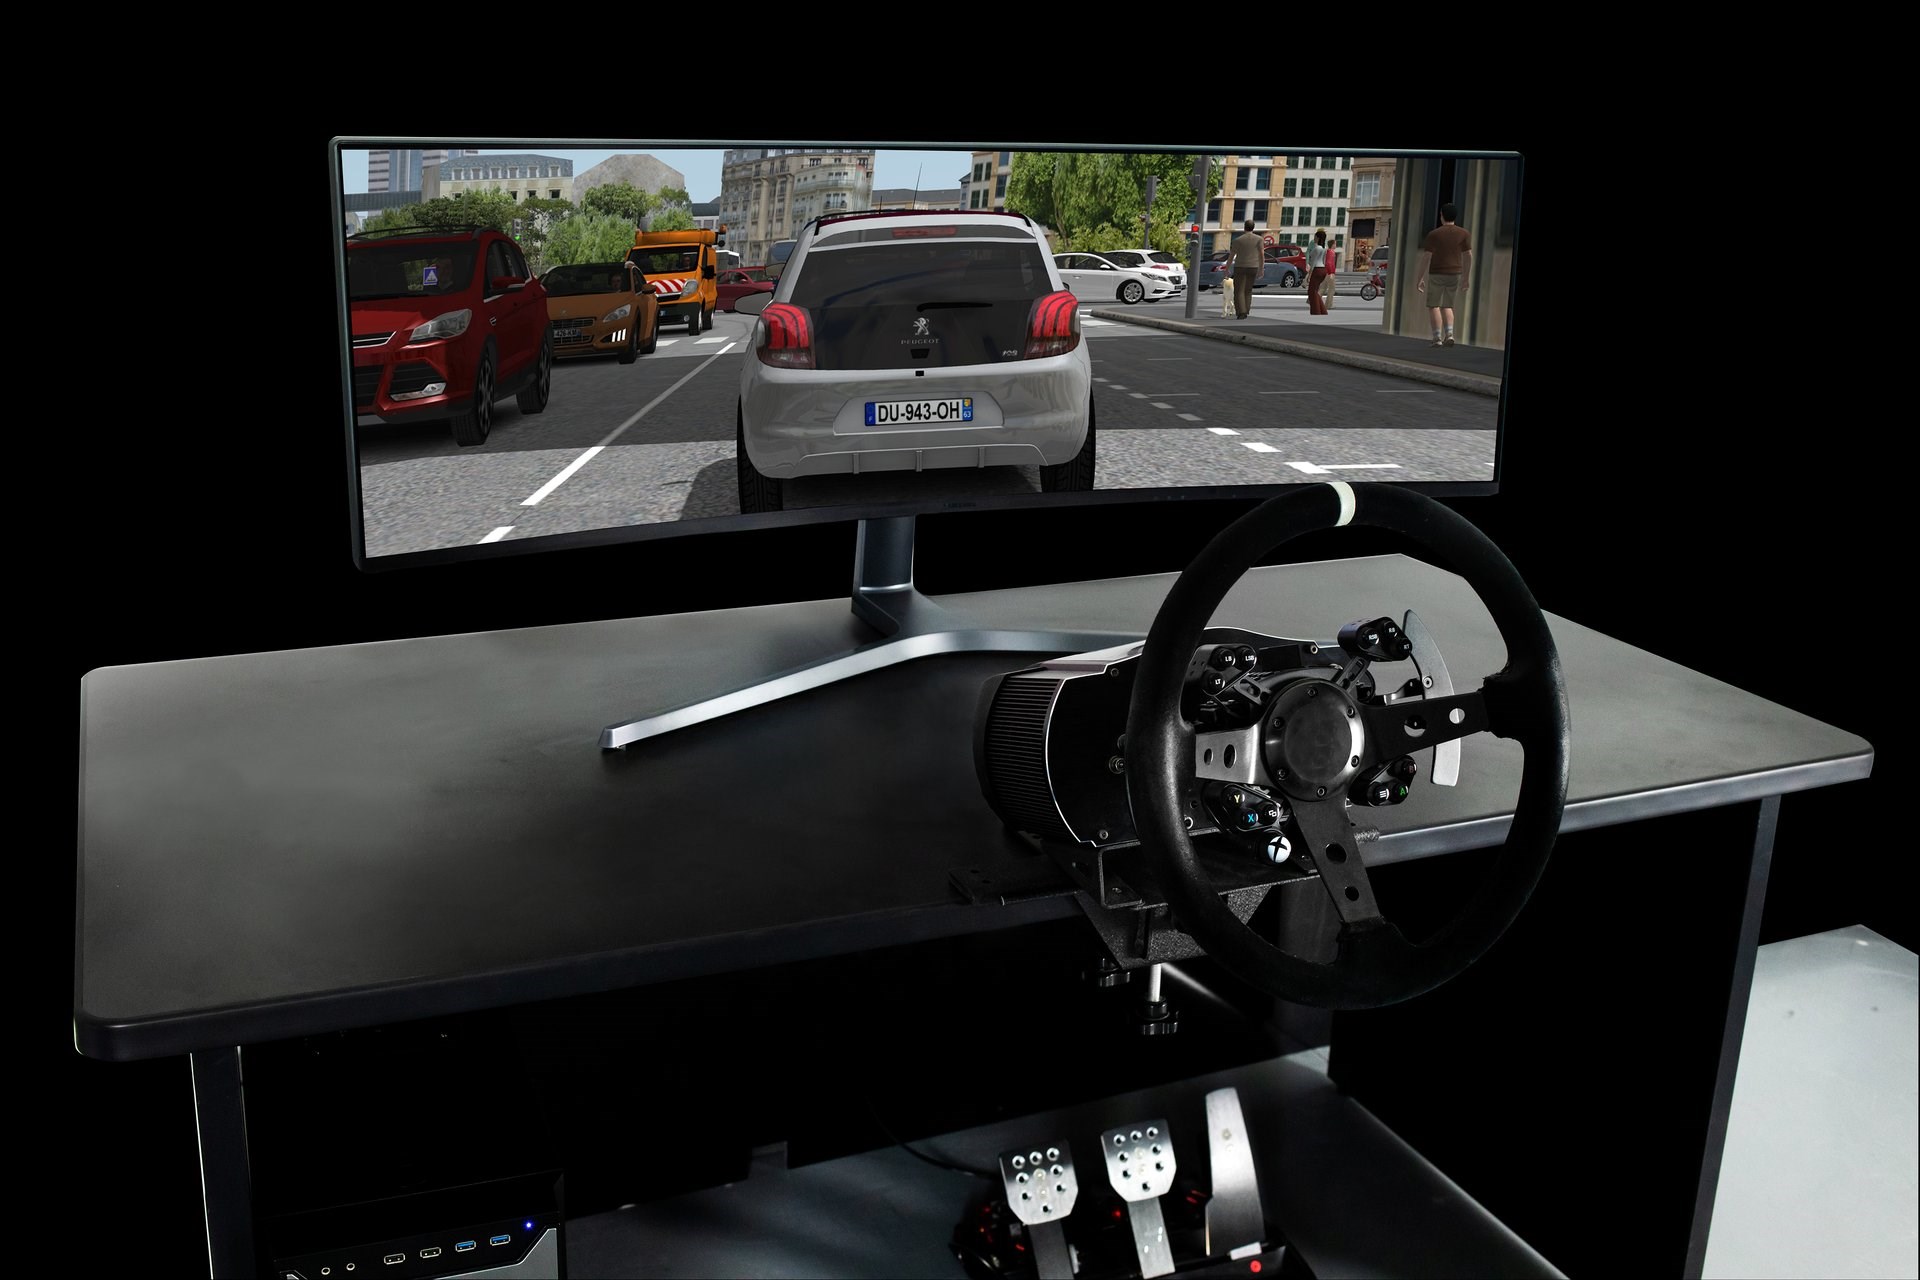 Driving simulators offer various advantages compared to real vehicles